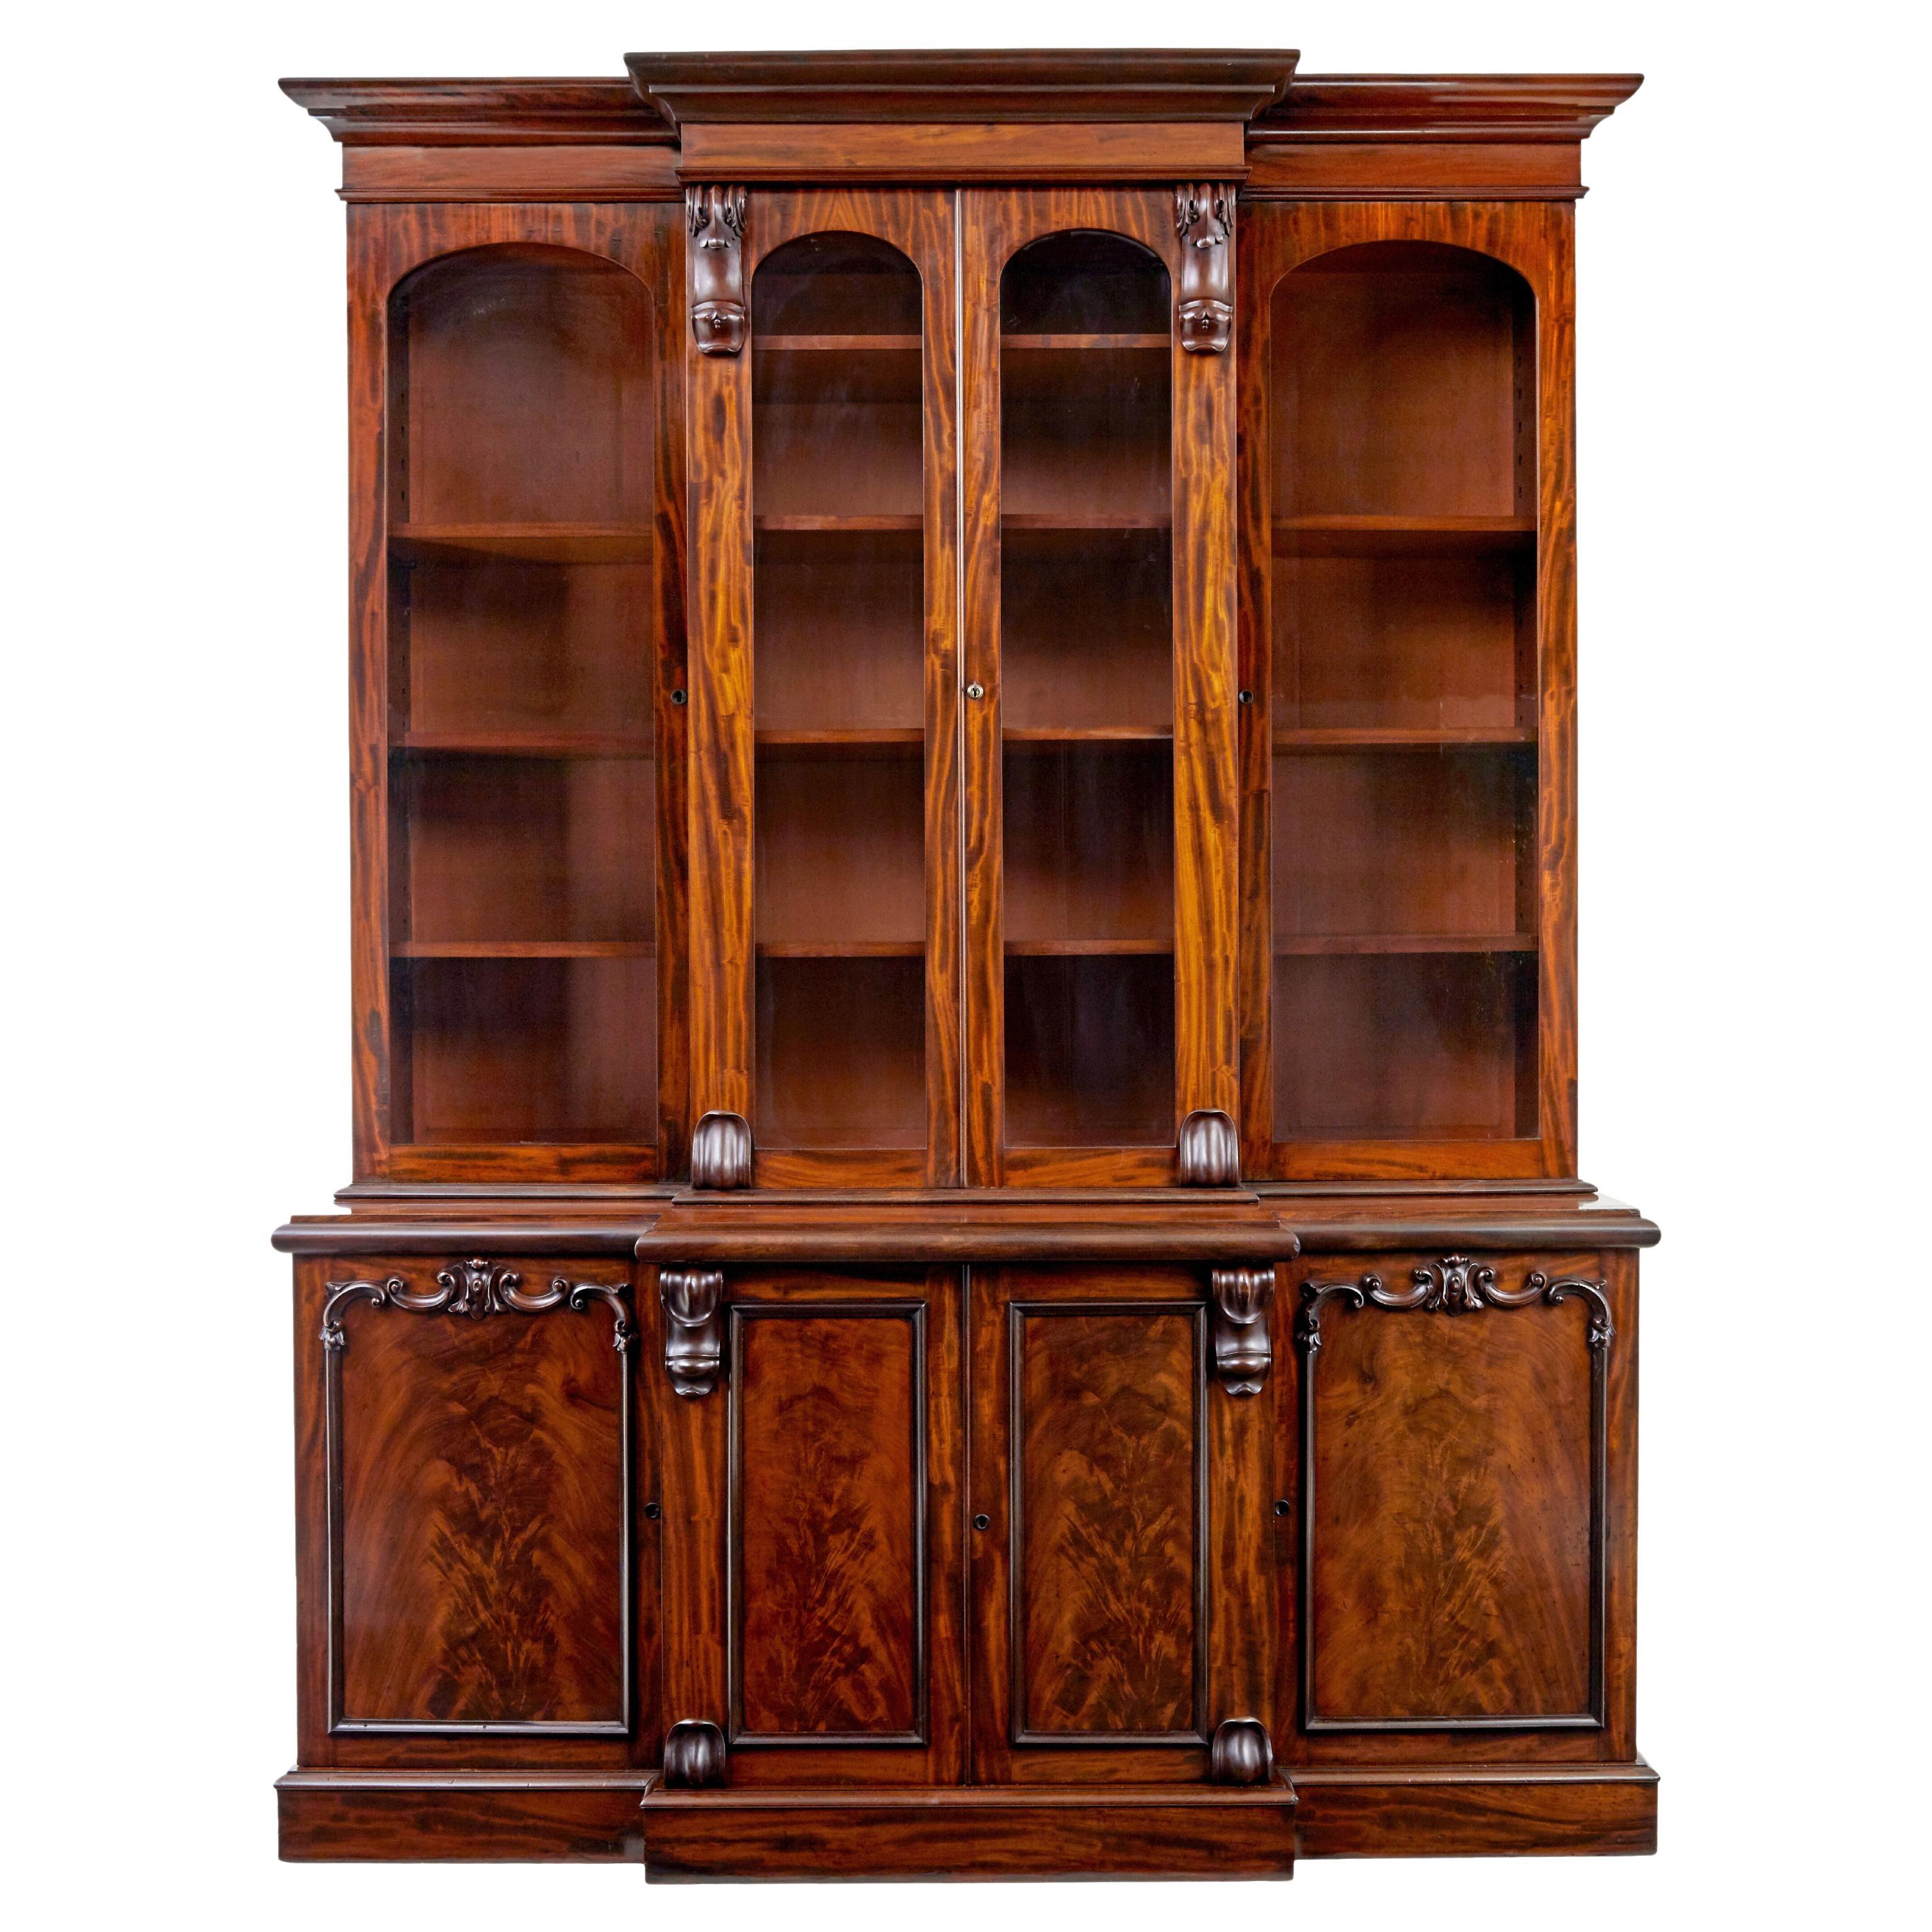 Early Victorian 19th century flame mahogany breakfront bookcase For Sale